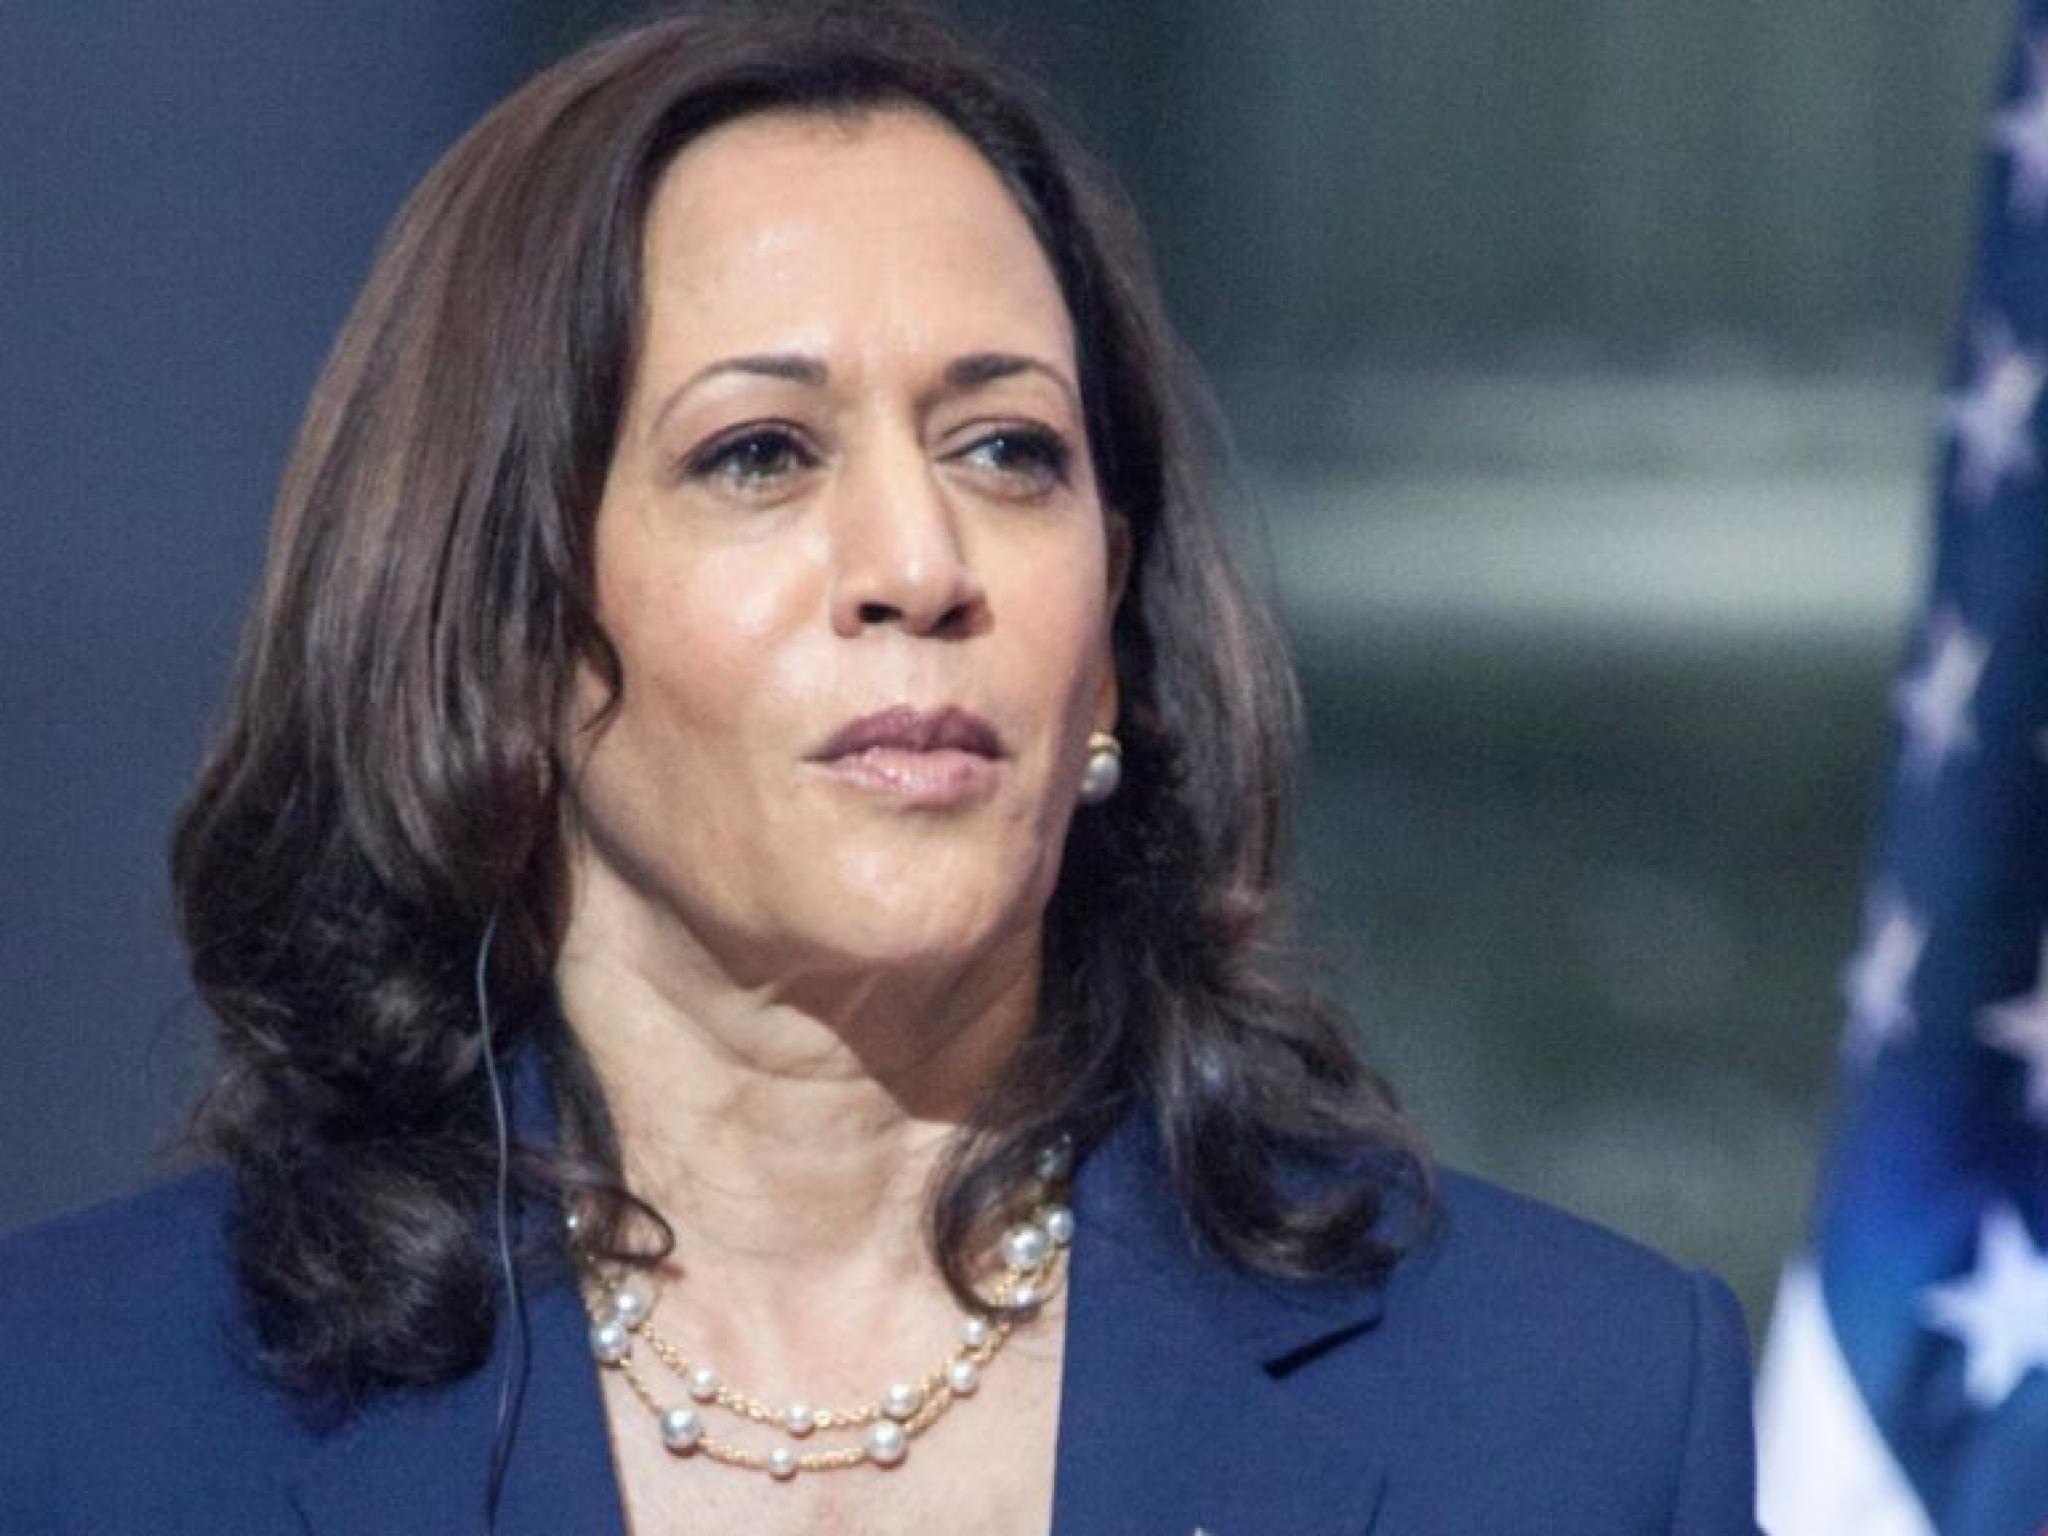  who-will-kamala-harris-pick-for-vice-president-crypto-bettors-have-4-favorites-for-democratic-party-running-mate 